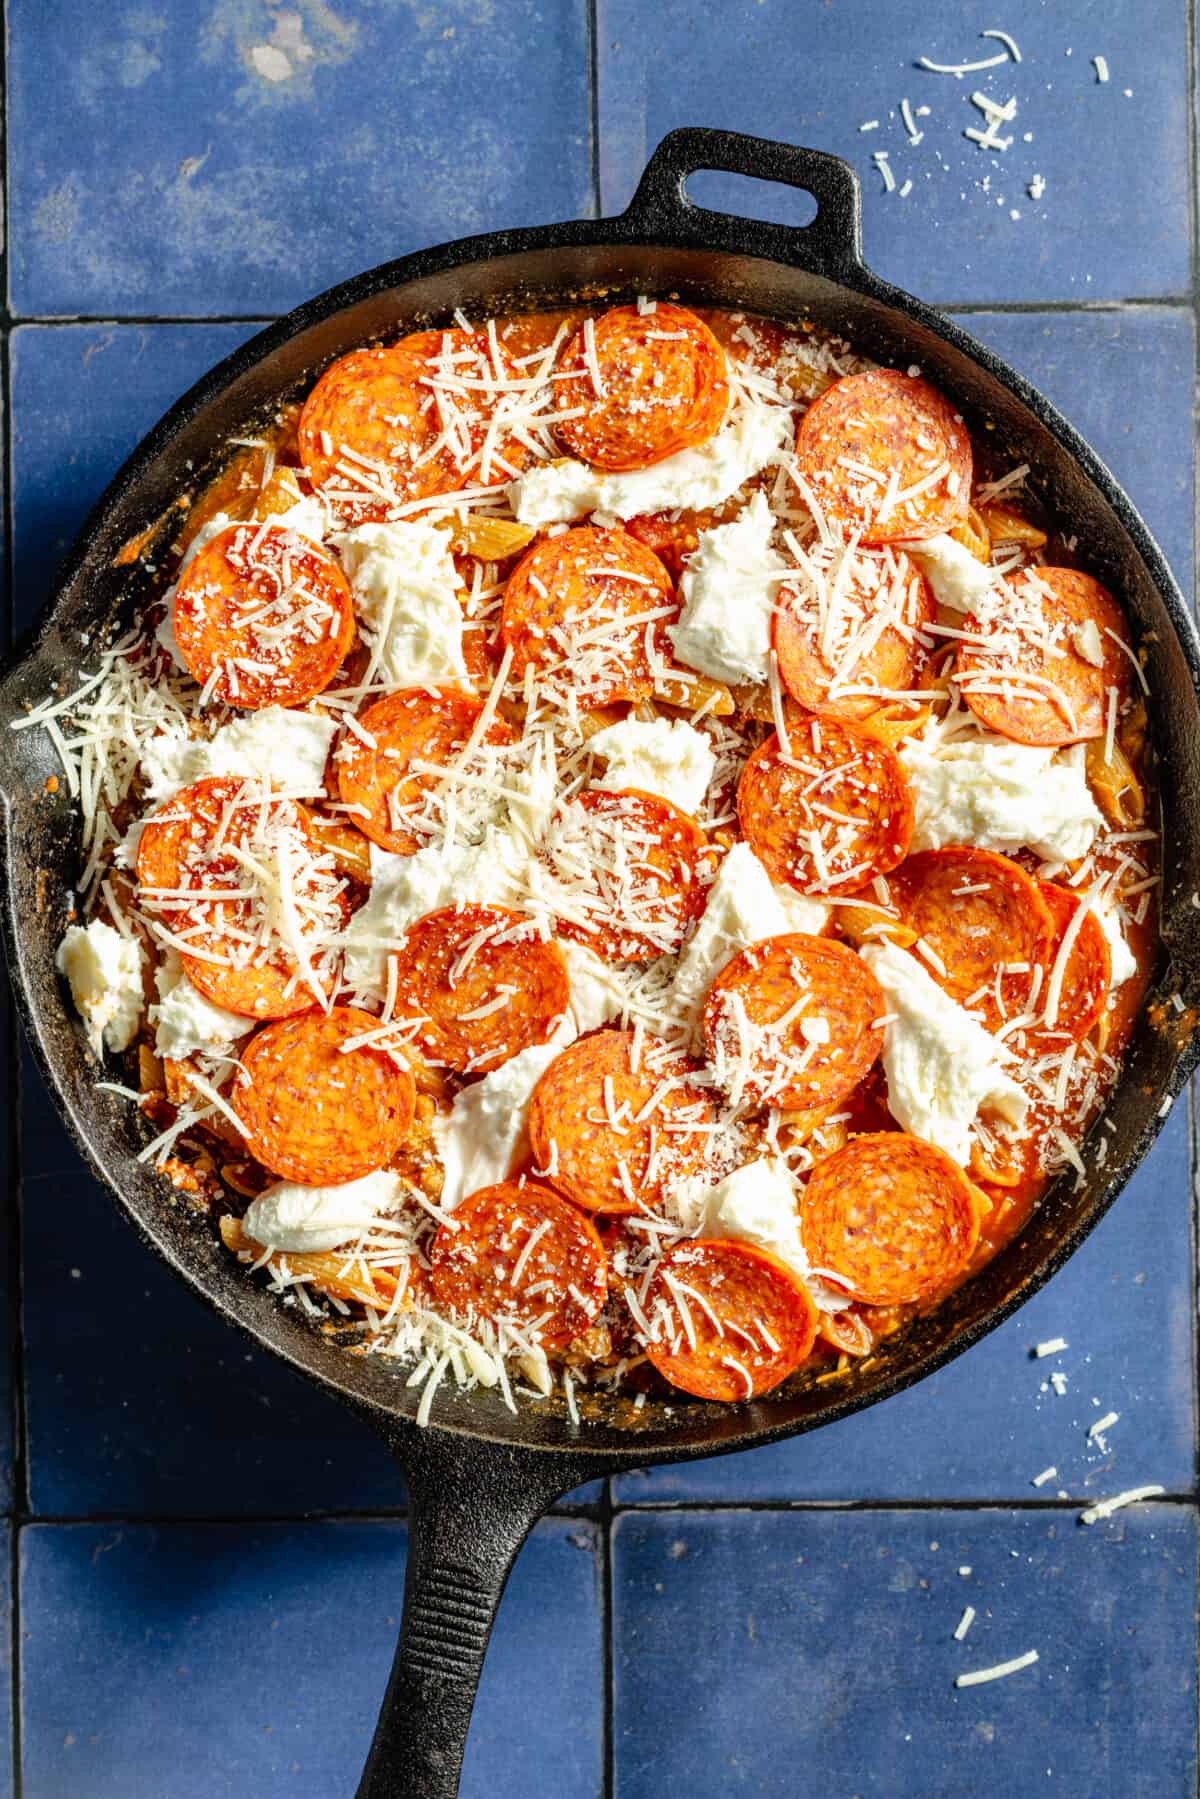 Skillet Pizza Penne with raw pepperoni and cheese on top before cooking.